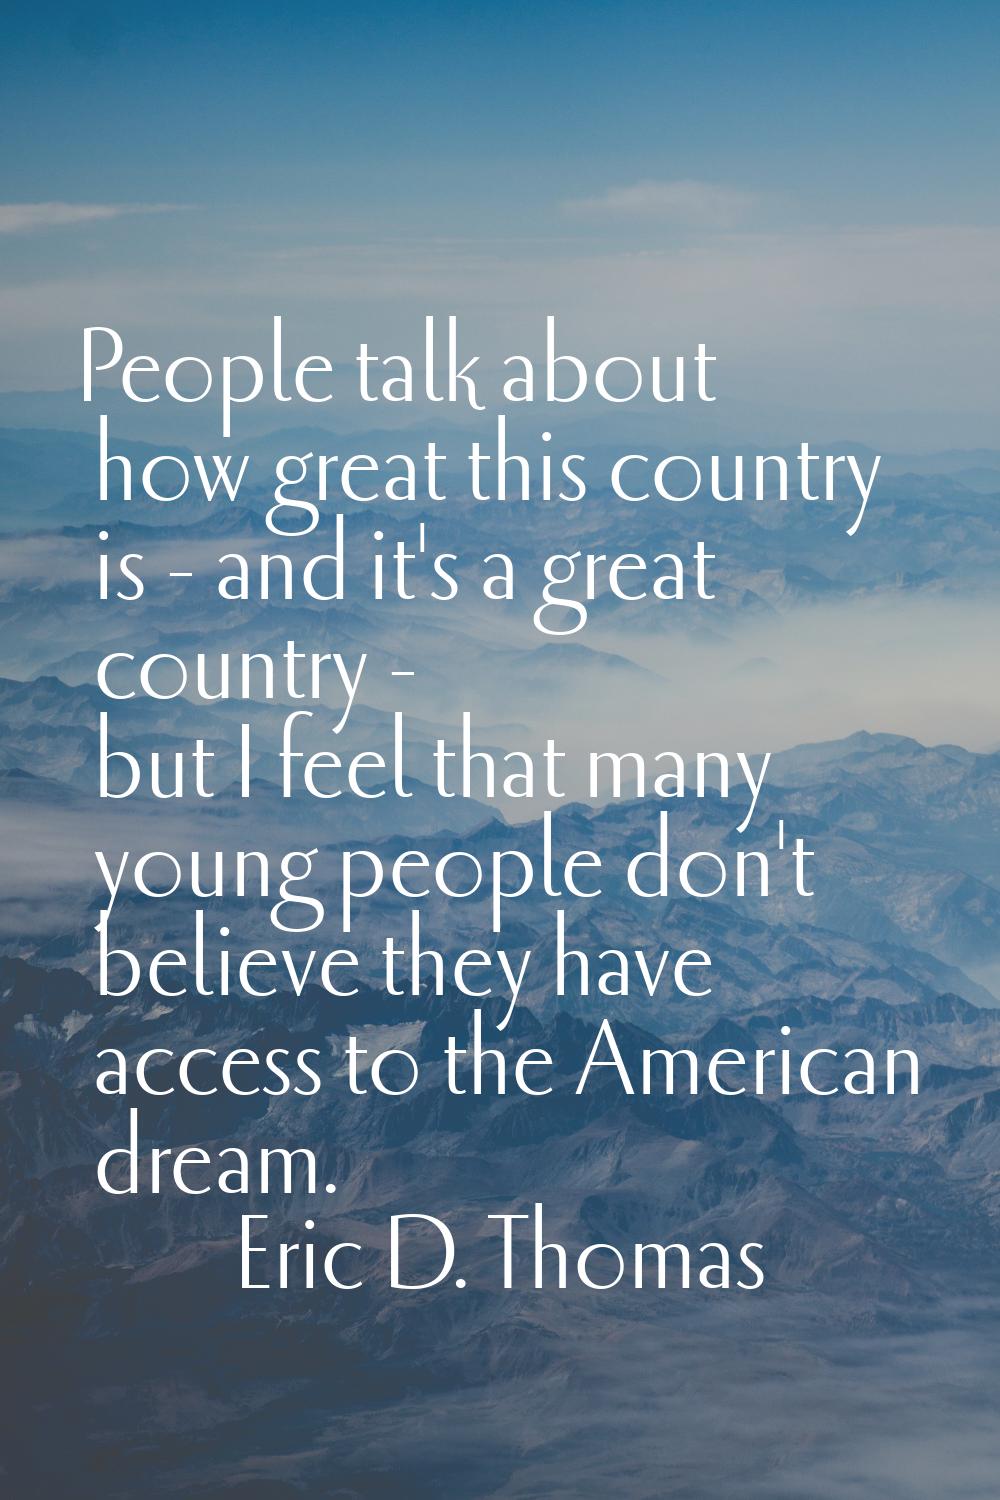 People talk about how great this country is - and it's a great country - but I feel that many young